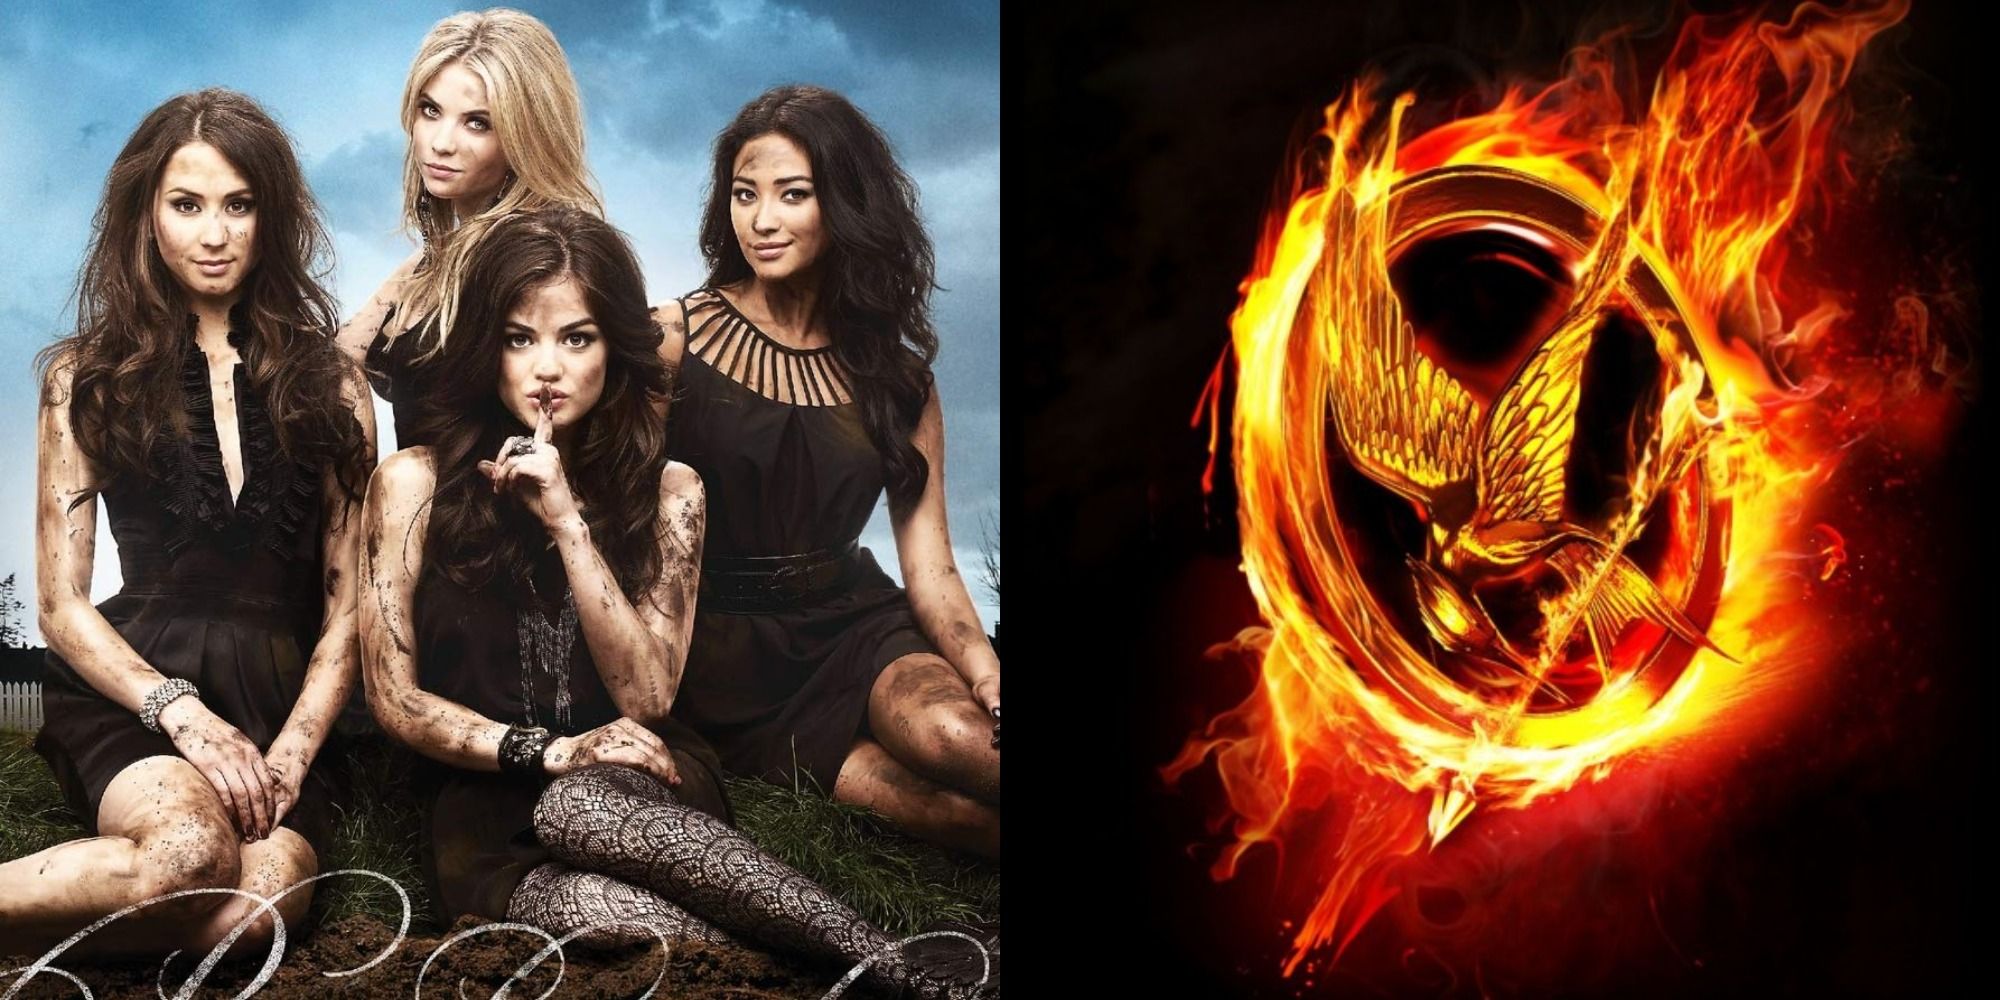 Pretty Little Liars Characters Ranked Least To Most Likely To Win The Hunger Games